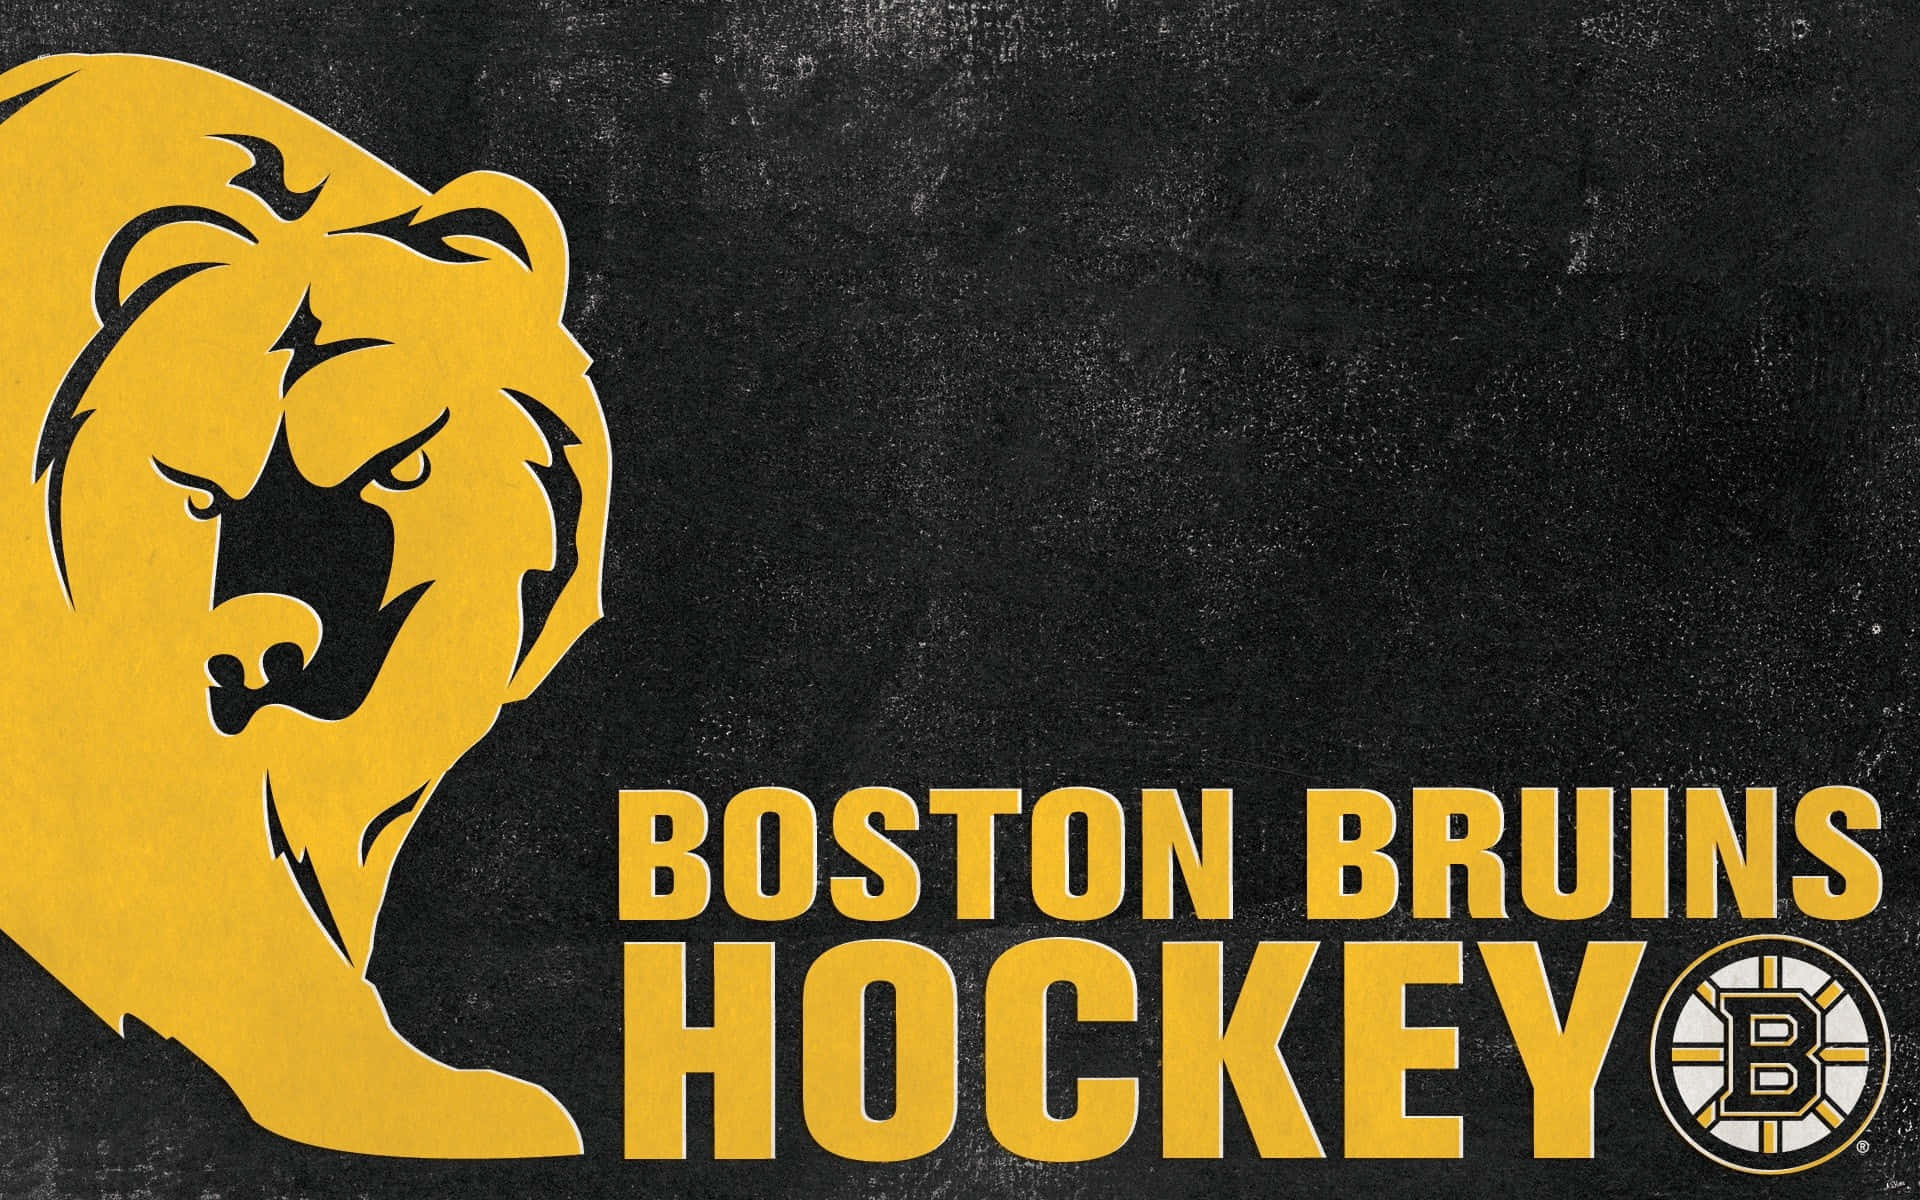 Cheer on Your Boston Bruins